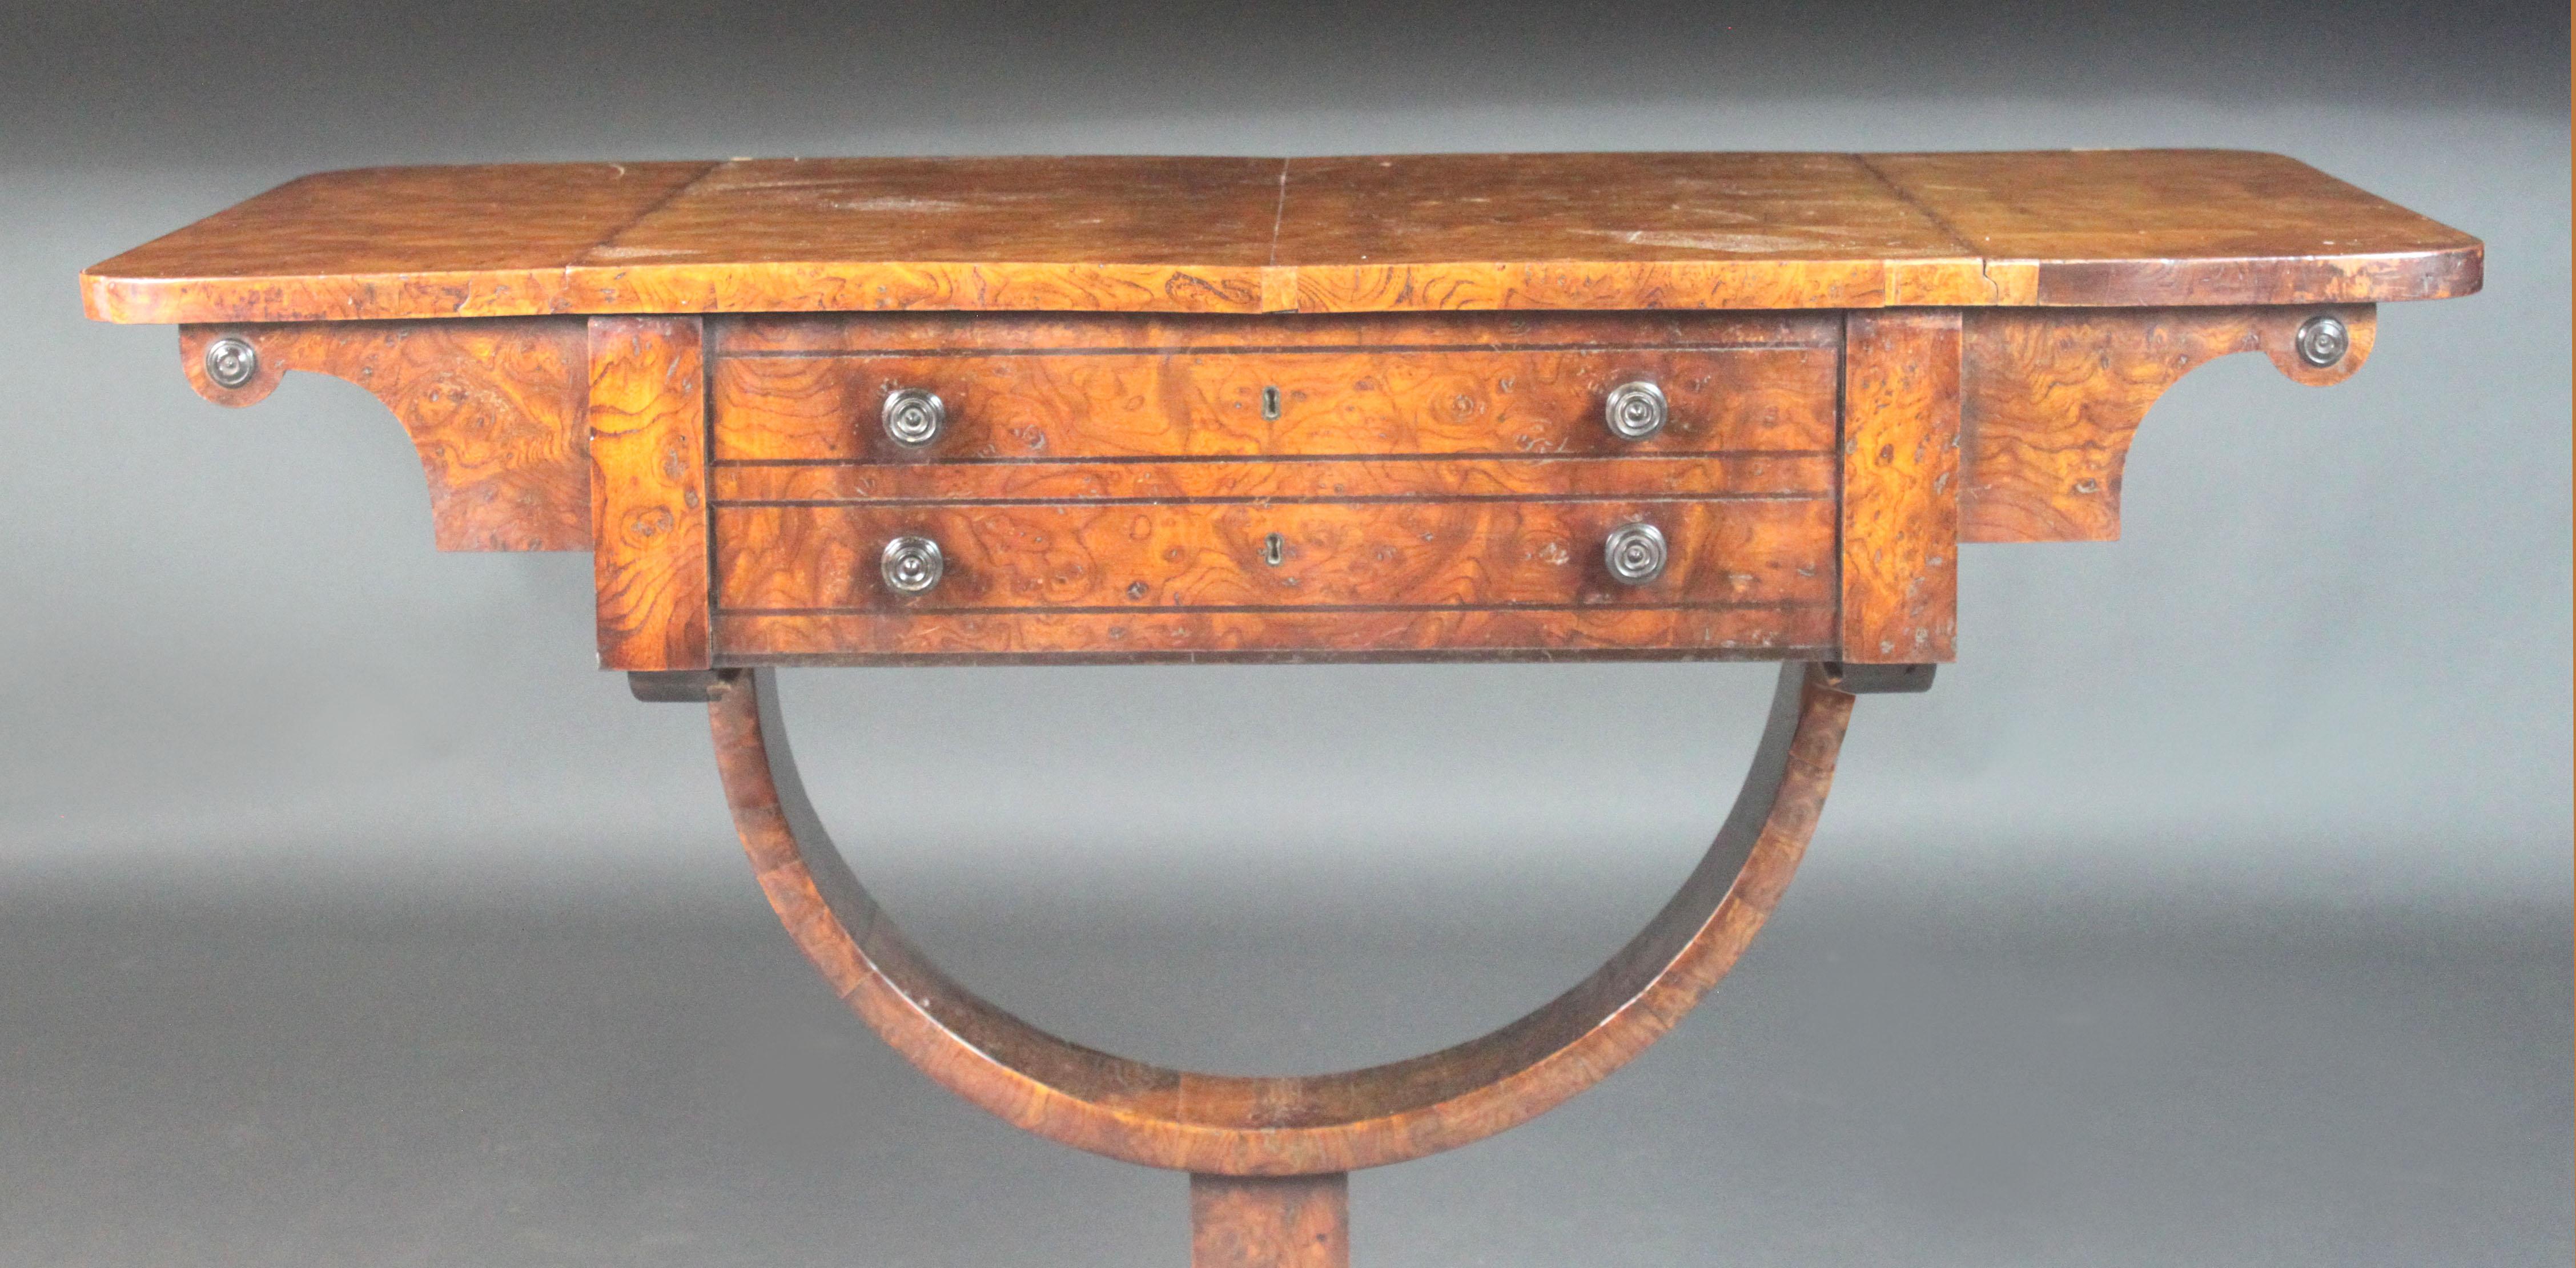 Regency Sewing Table in Burr Ash In Good Condition For Sale In Bradford-on-Avon, Wiltshire